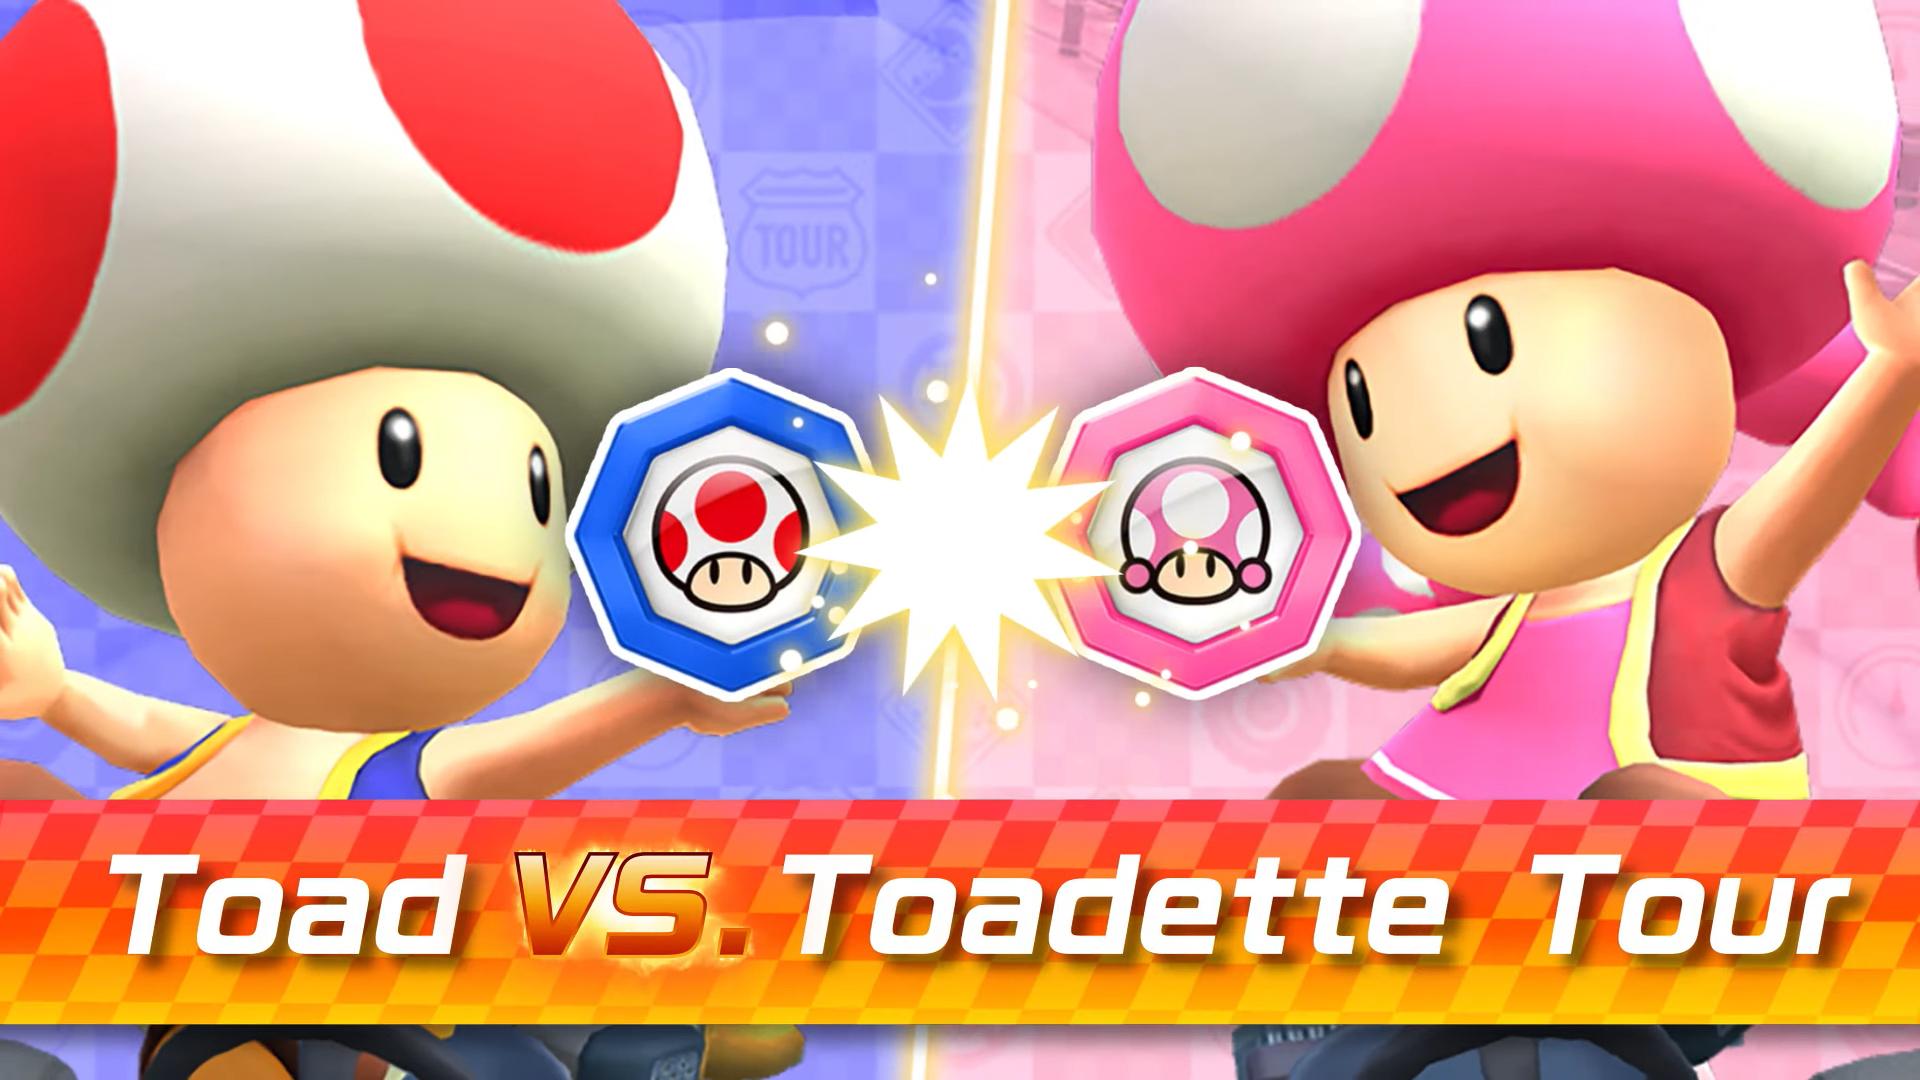 Toadette Wallpapers Top Free Toadette Backgrounds Wallpaperaccess 8341